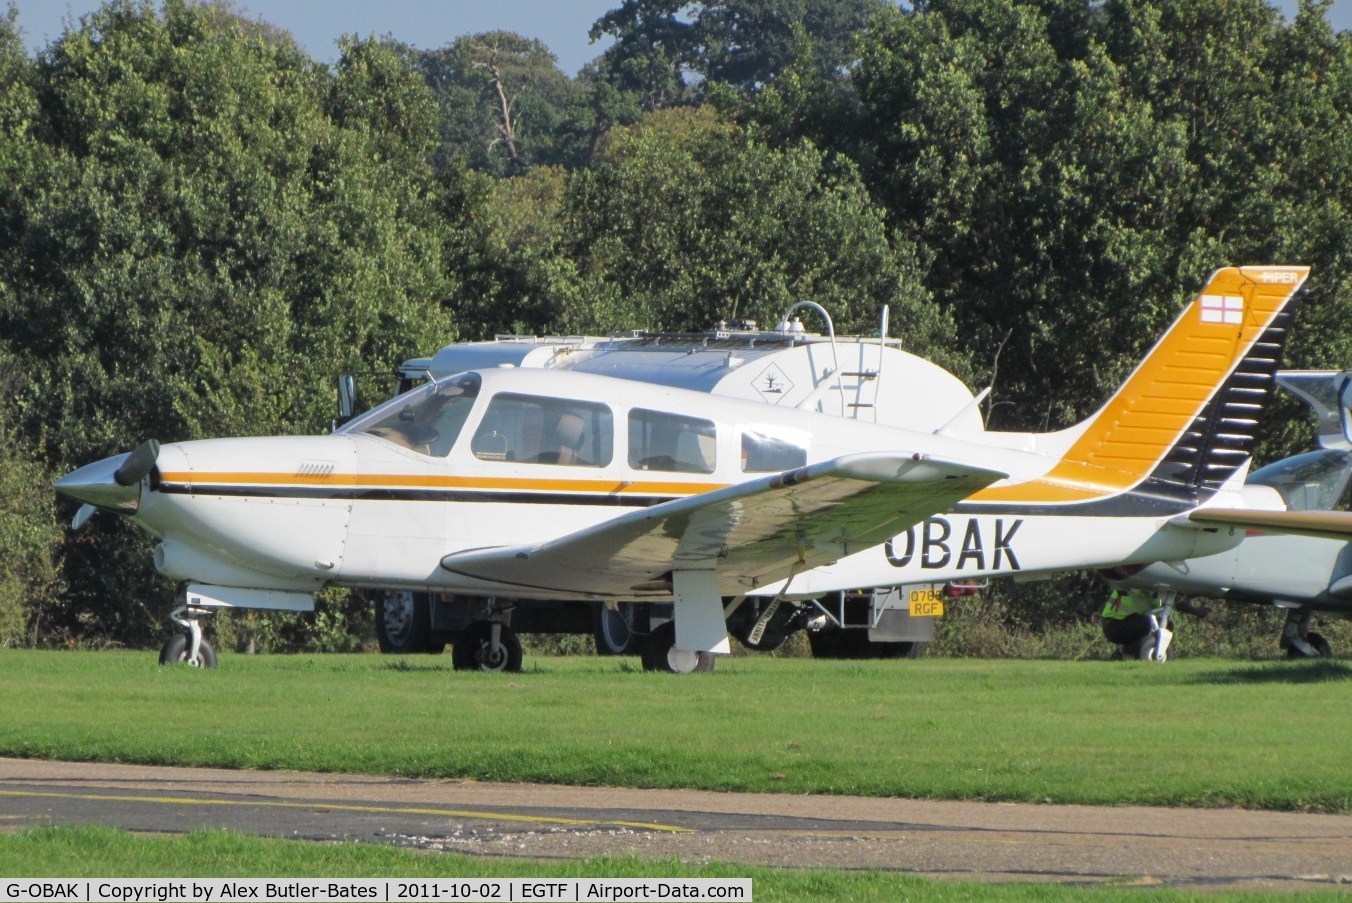 G-OBAK, 1977 Piper PA-28R-201T Cherokee Arrow III C/N 28R-7703054, Parked on the grass, in its now old colours.